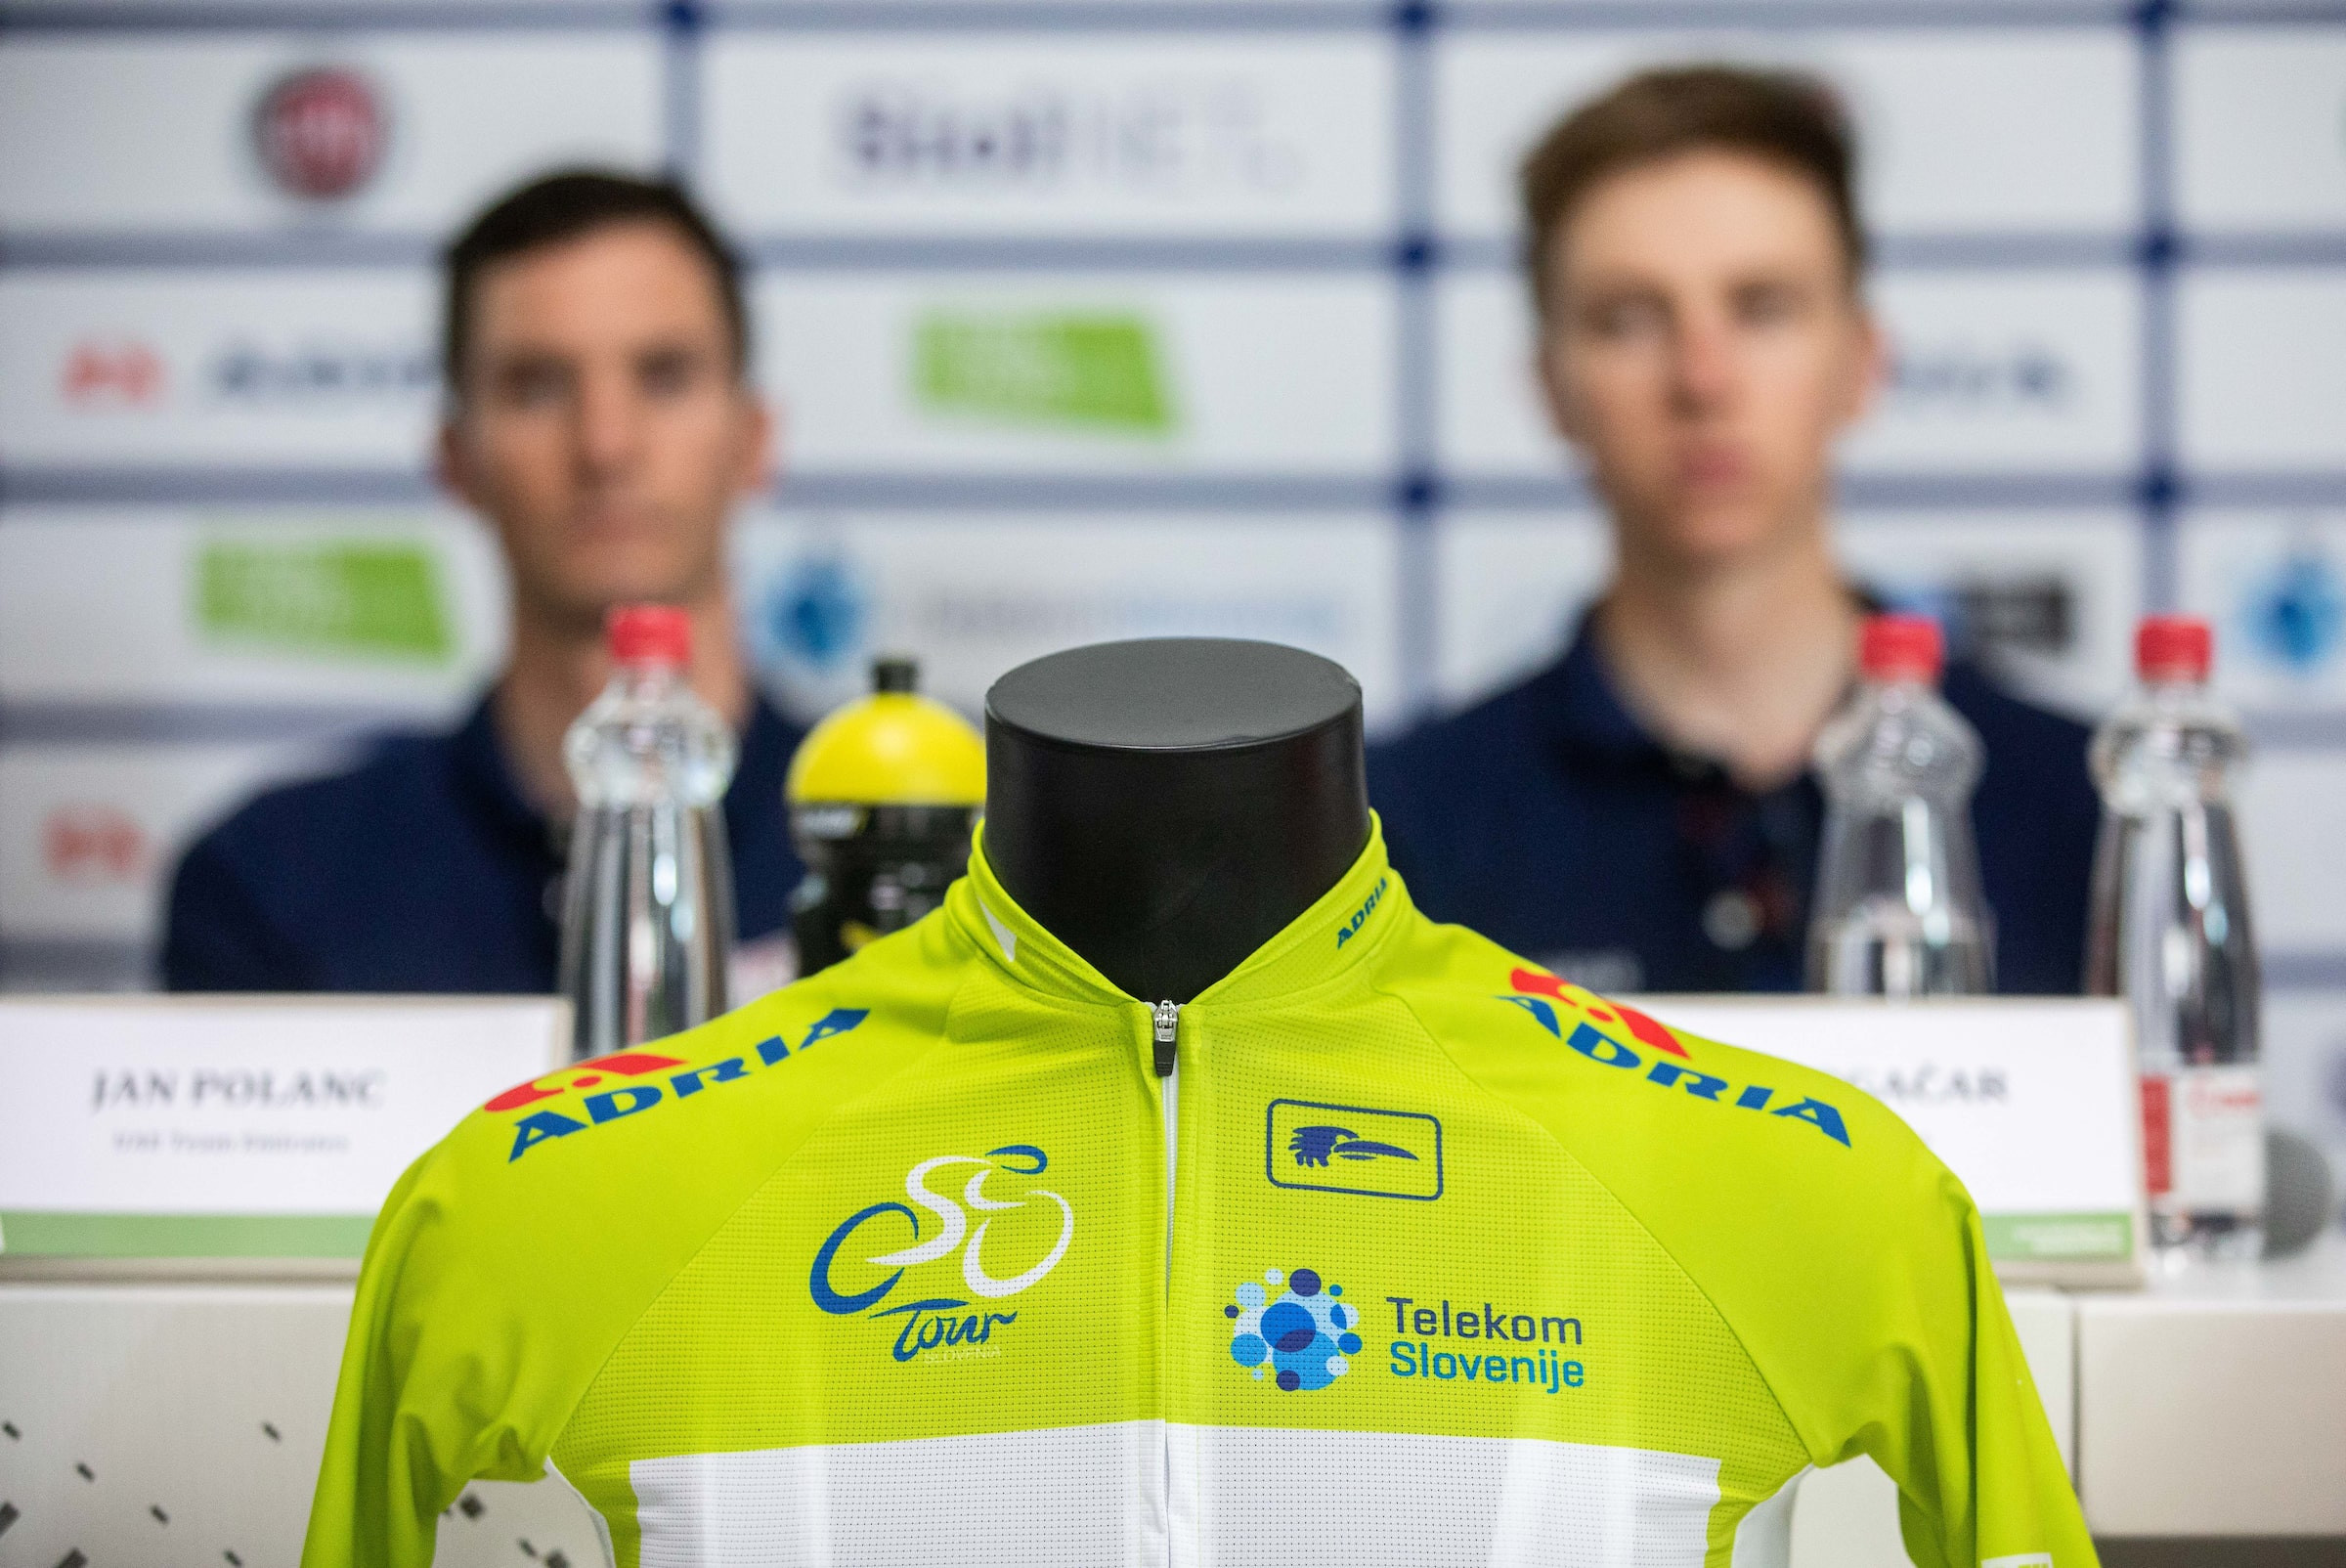 Slovenian cyclists in the Fight for Green